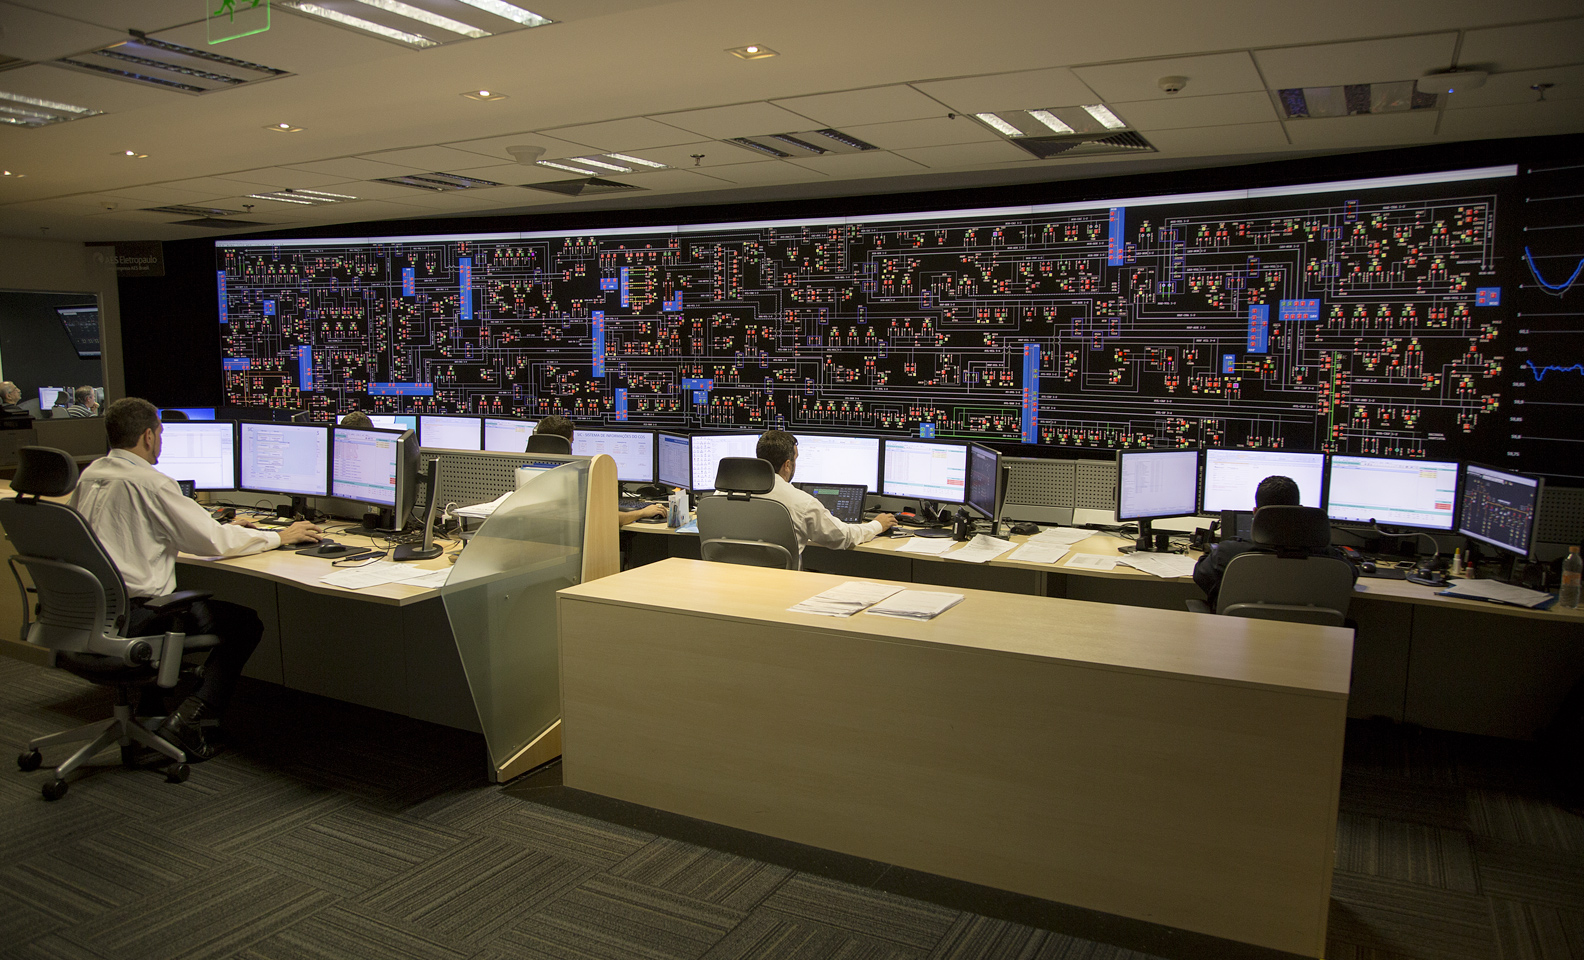 Inside a control room employees are sat in front of a PC